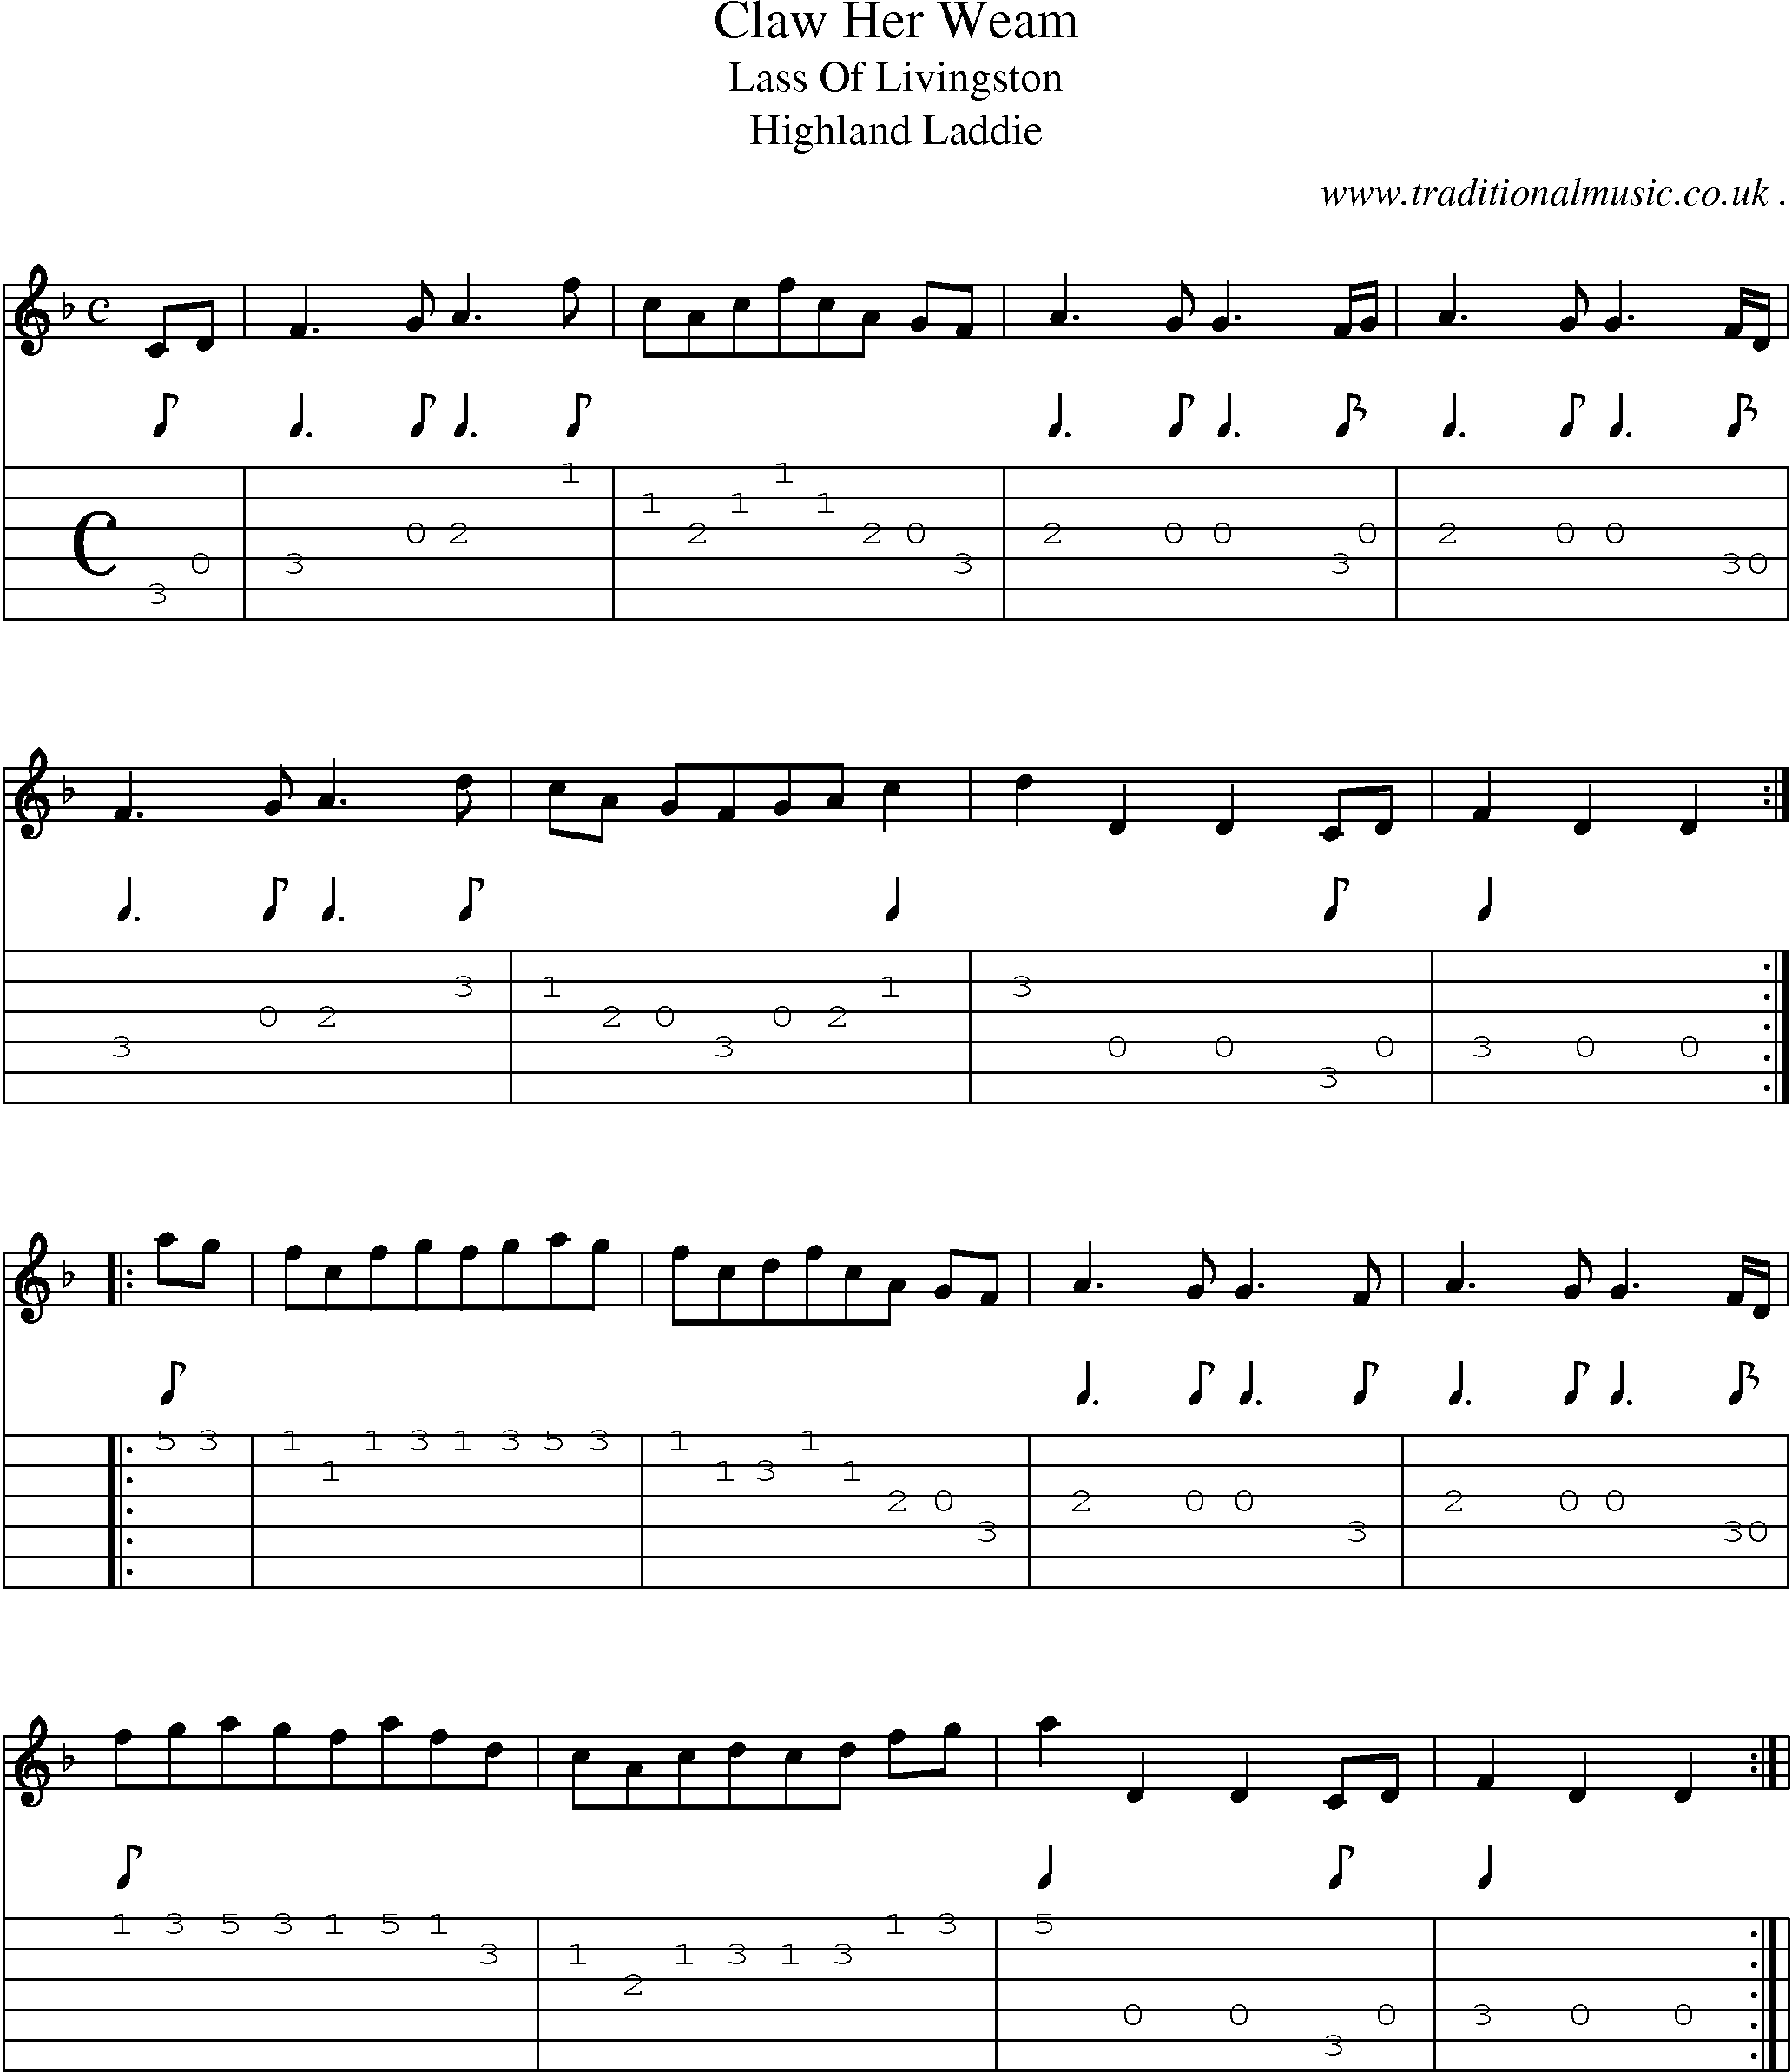 Sheet-Music and Guitar Tabs for Claw Her Weam